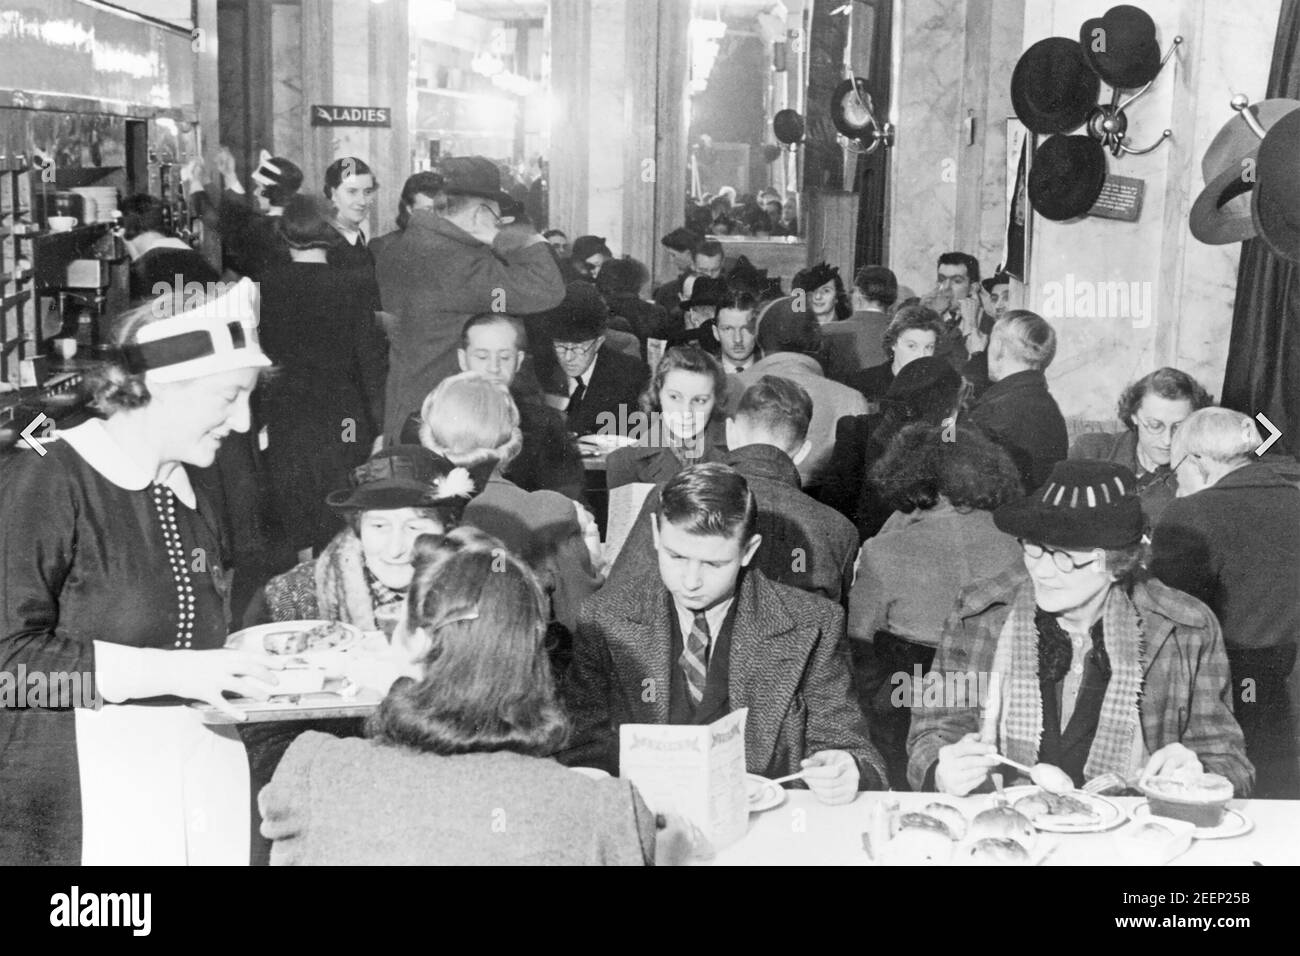 J. LYONS & CO British restaurant, food and  hotel chain founded in 1884. Packed customers for afternoon tea at the famous Lyons' Corner House in Coventry Street, London in January 1942. One of the famous Nippie waitresses is doing the serving. Stock Photo